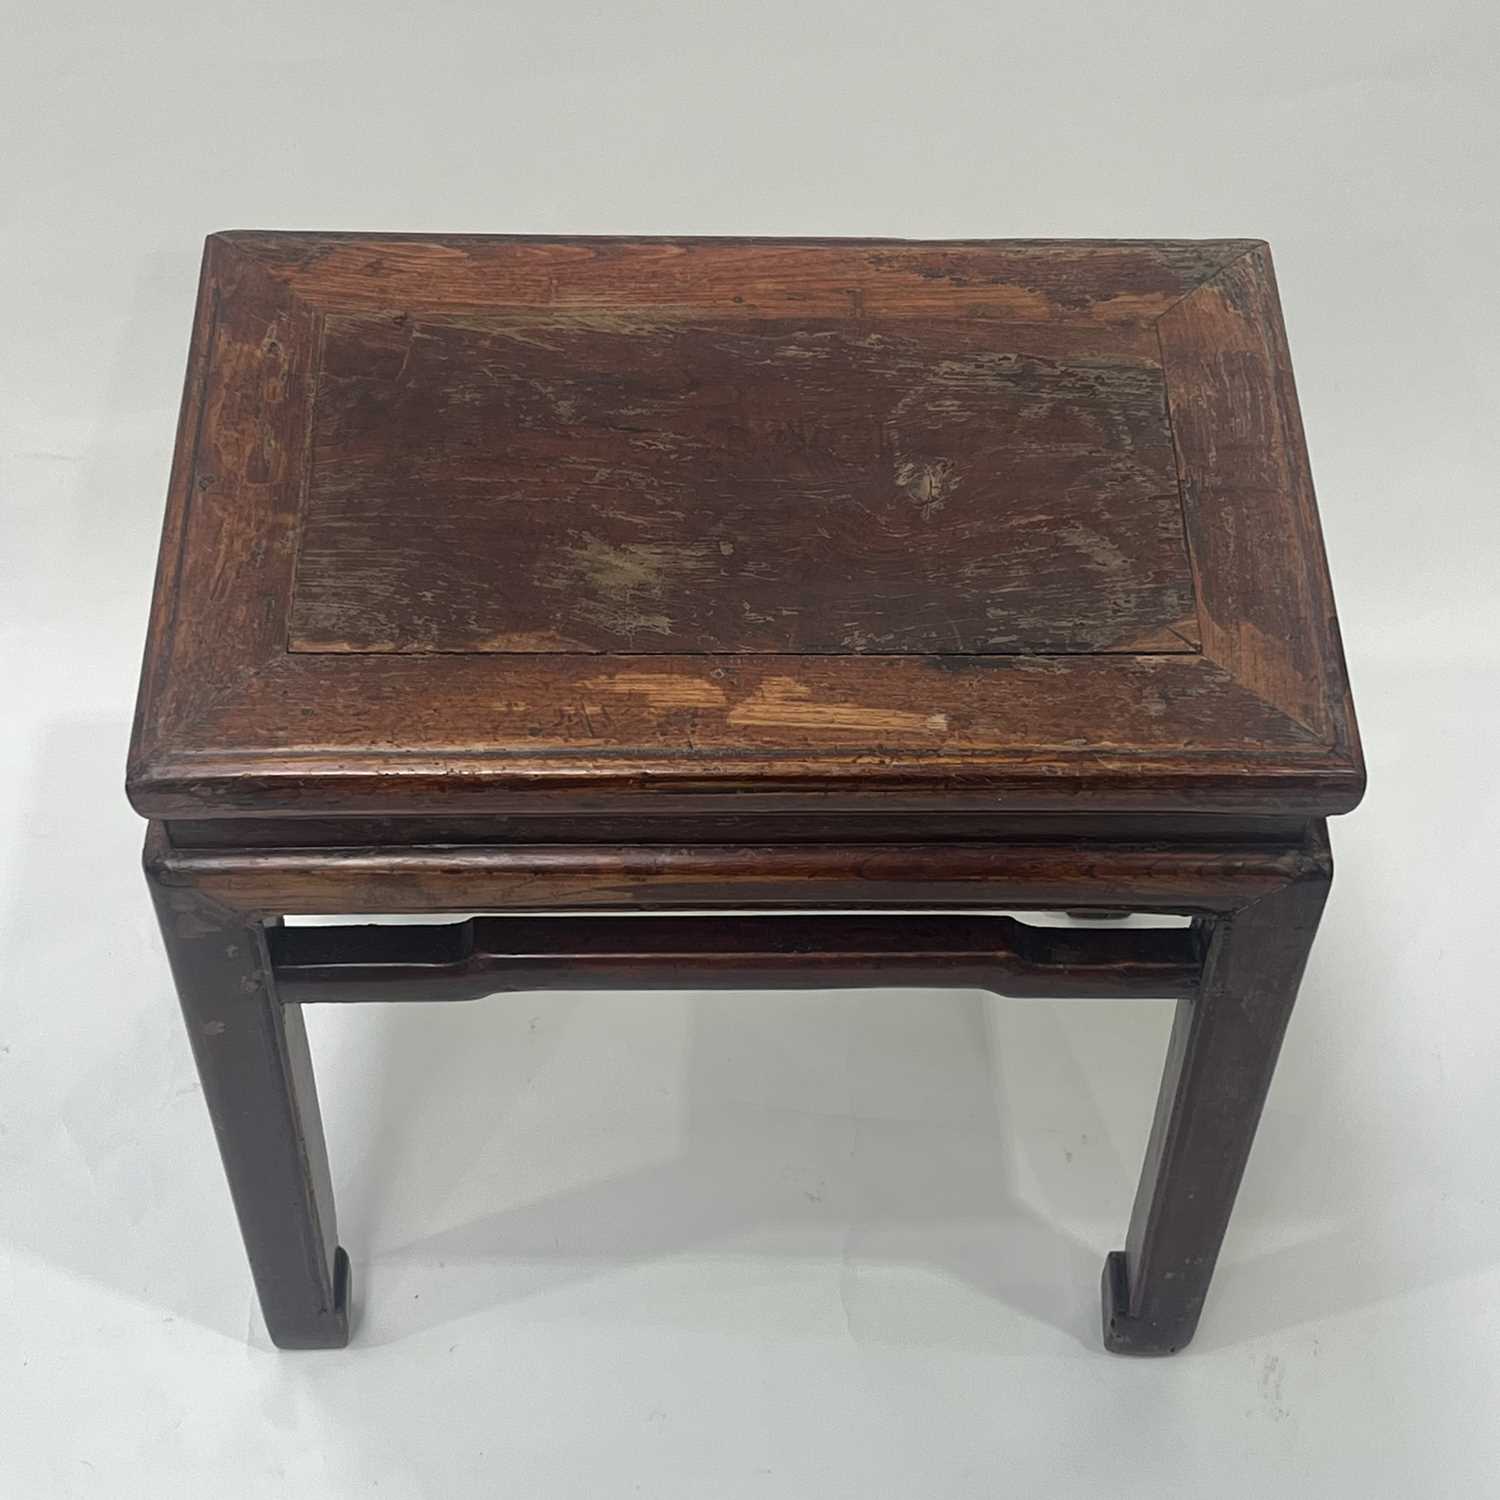 A Chinese stained and lacquered wood low table or stool, probably 19th century or earlier, - Image 3 of 3